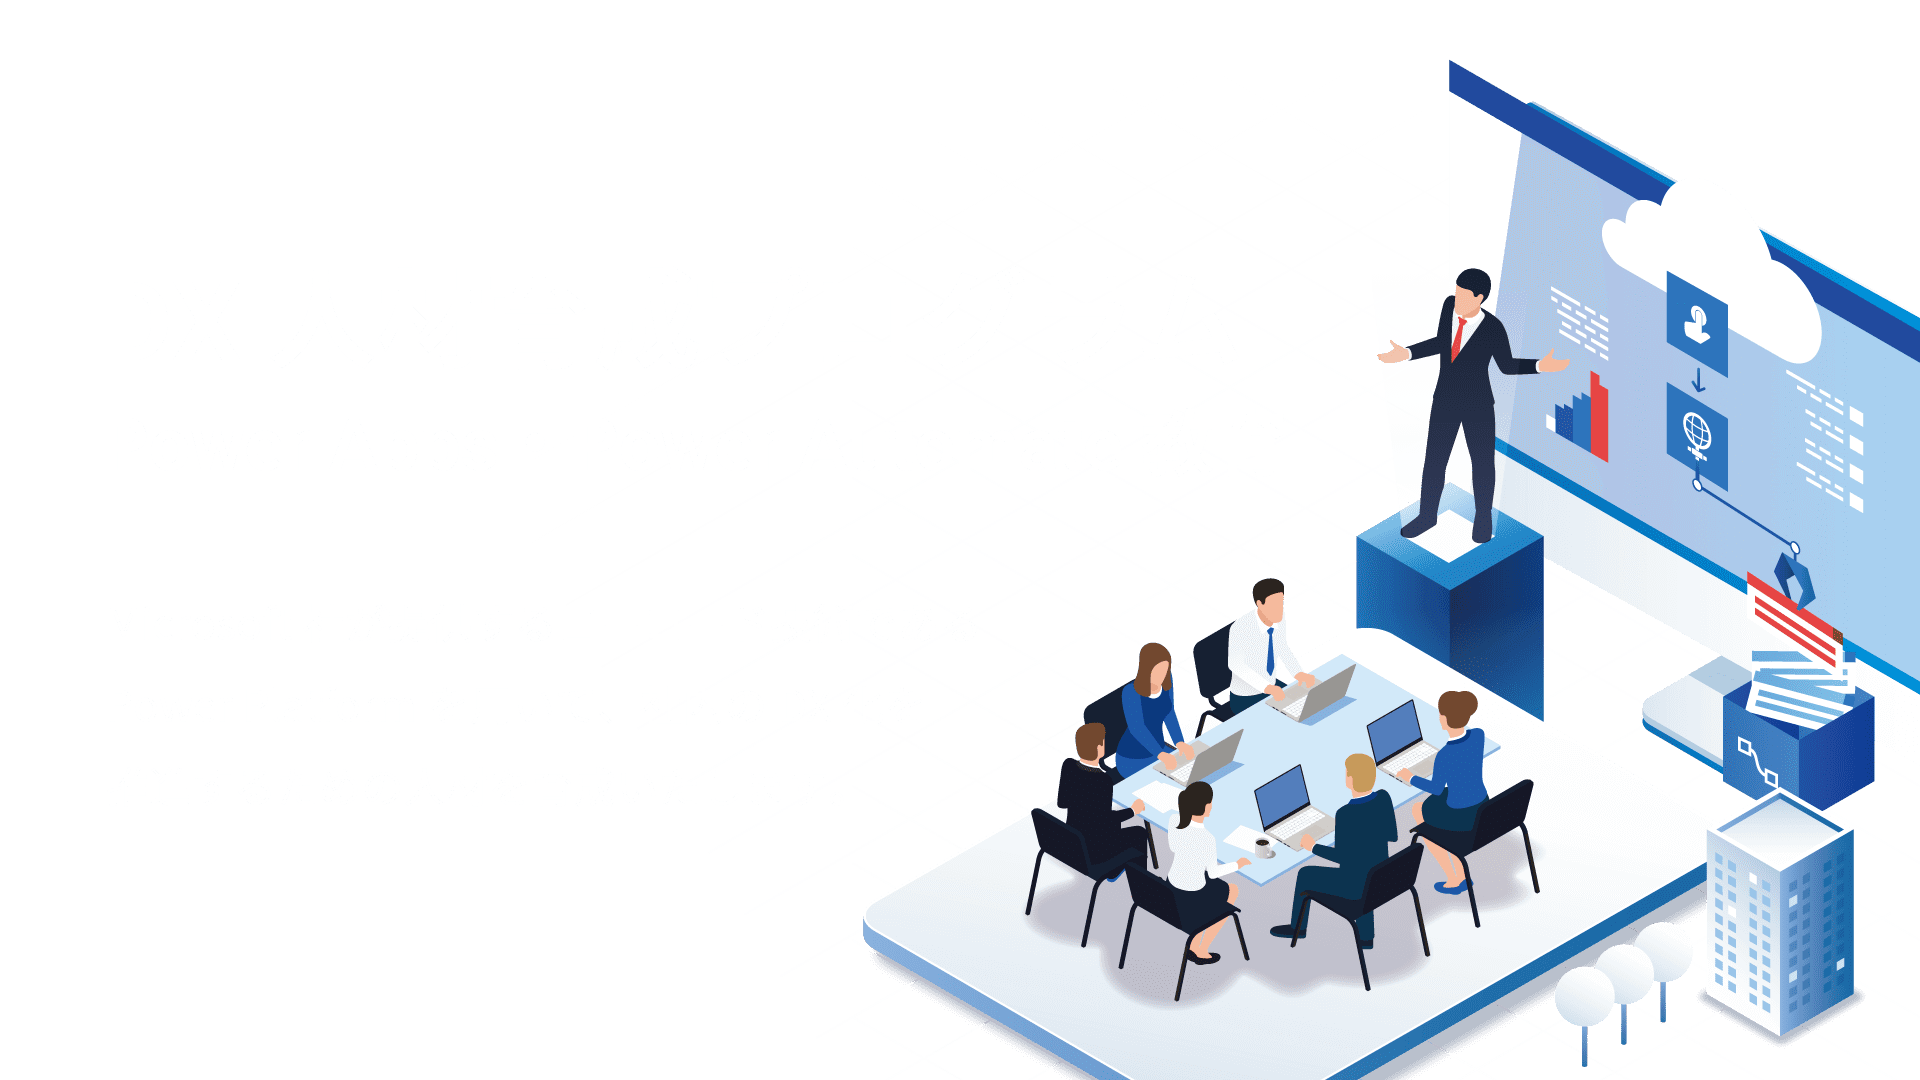 DX人材育成プログラム Power Apps・Power Automate 教育